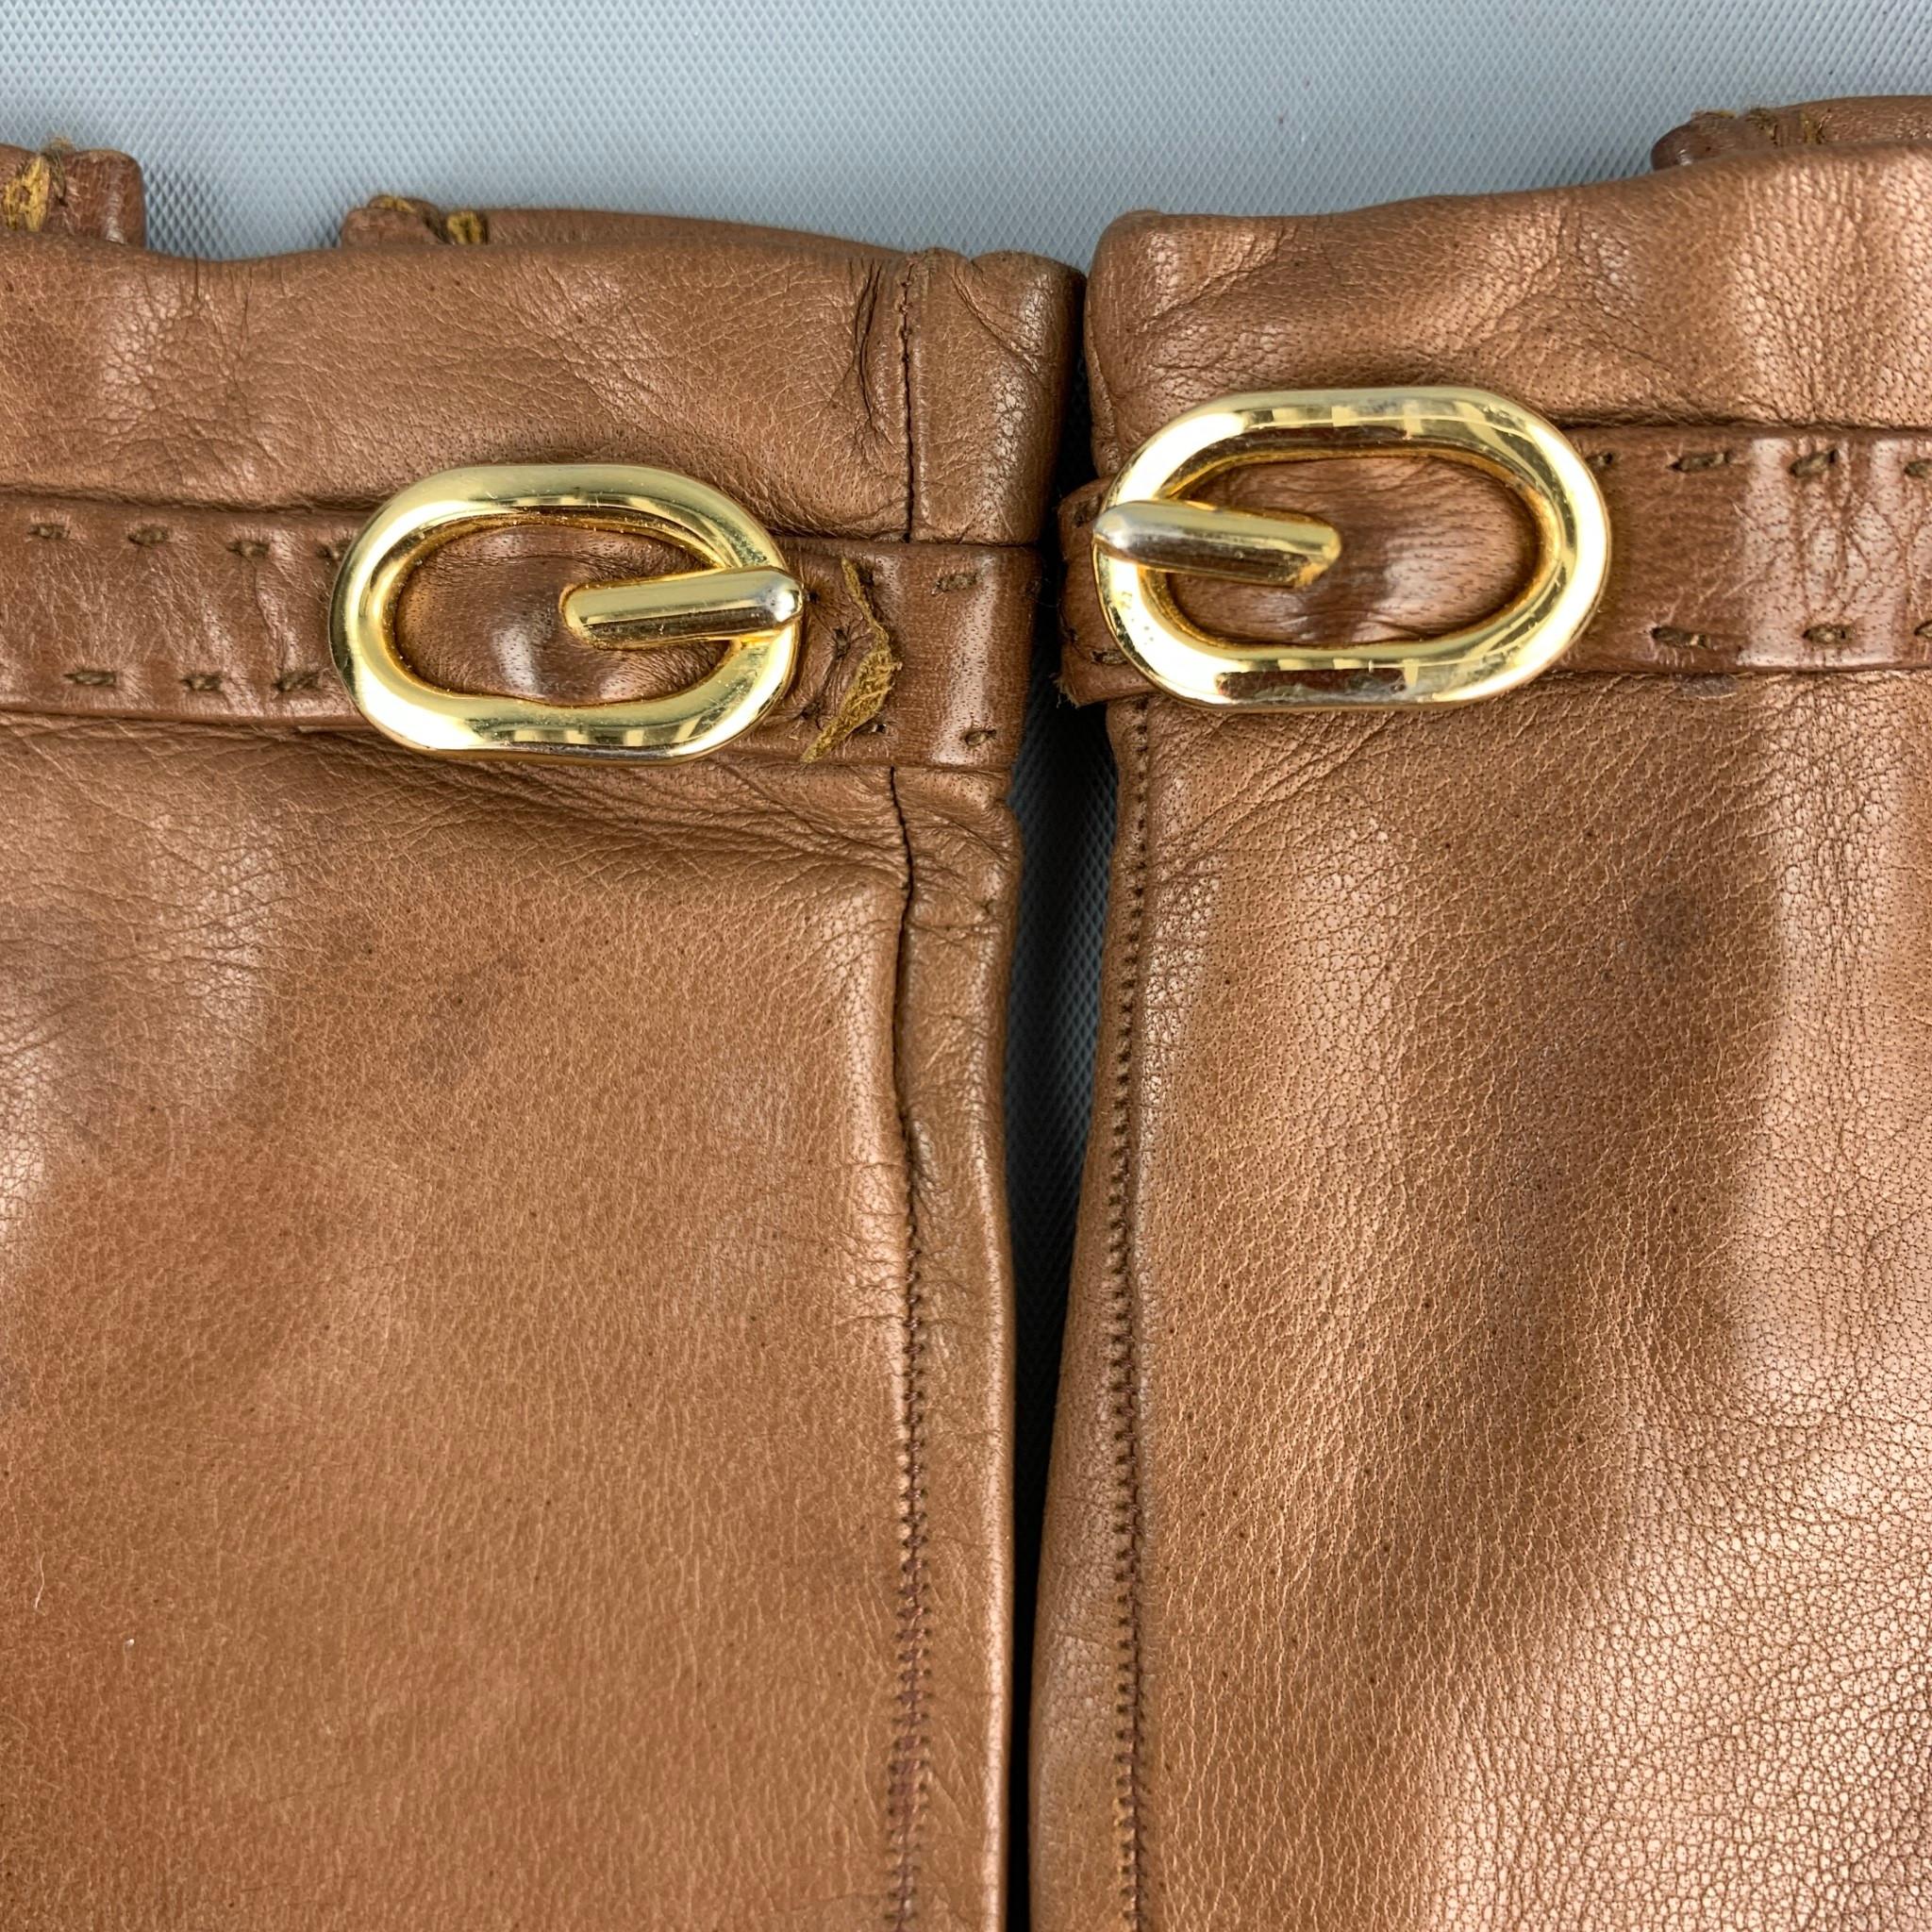 LOEWE gloves comes in a tan leather with gold buckle details and top stitching. Made in Spain.

Good Pre-Owned Condition.
Marked: No size marked

Measurements:

Width: 3.5 in. 
Length: 8.5 in. 

SKU: 87971
Category: Gloves

More Details
Brand: